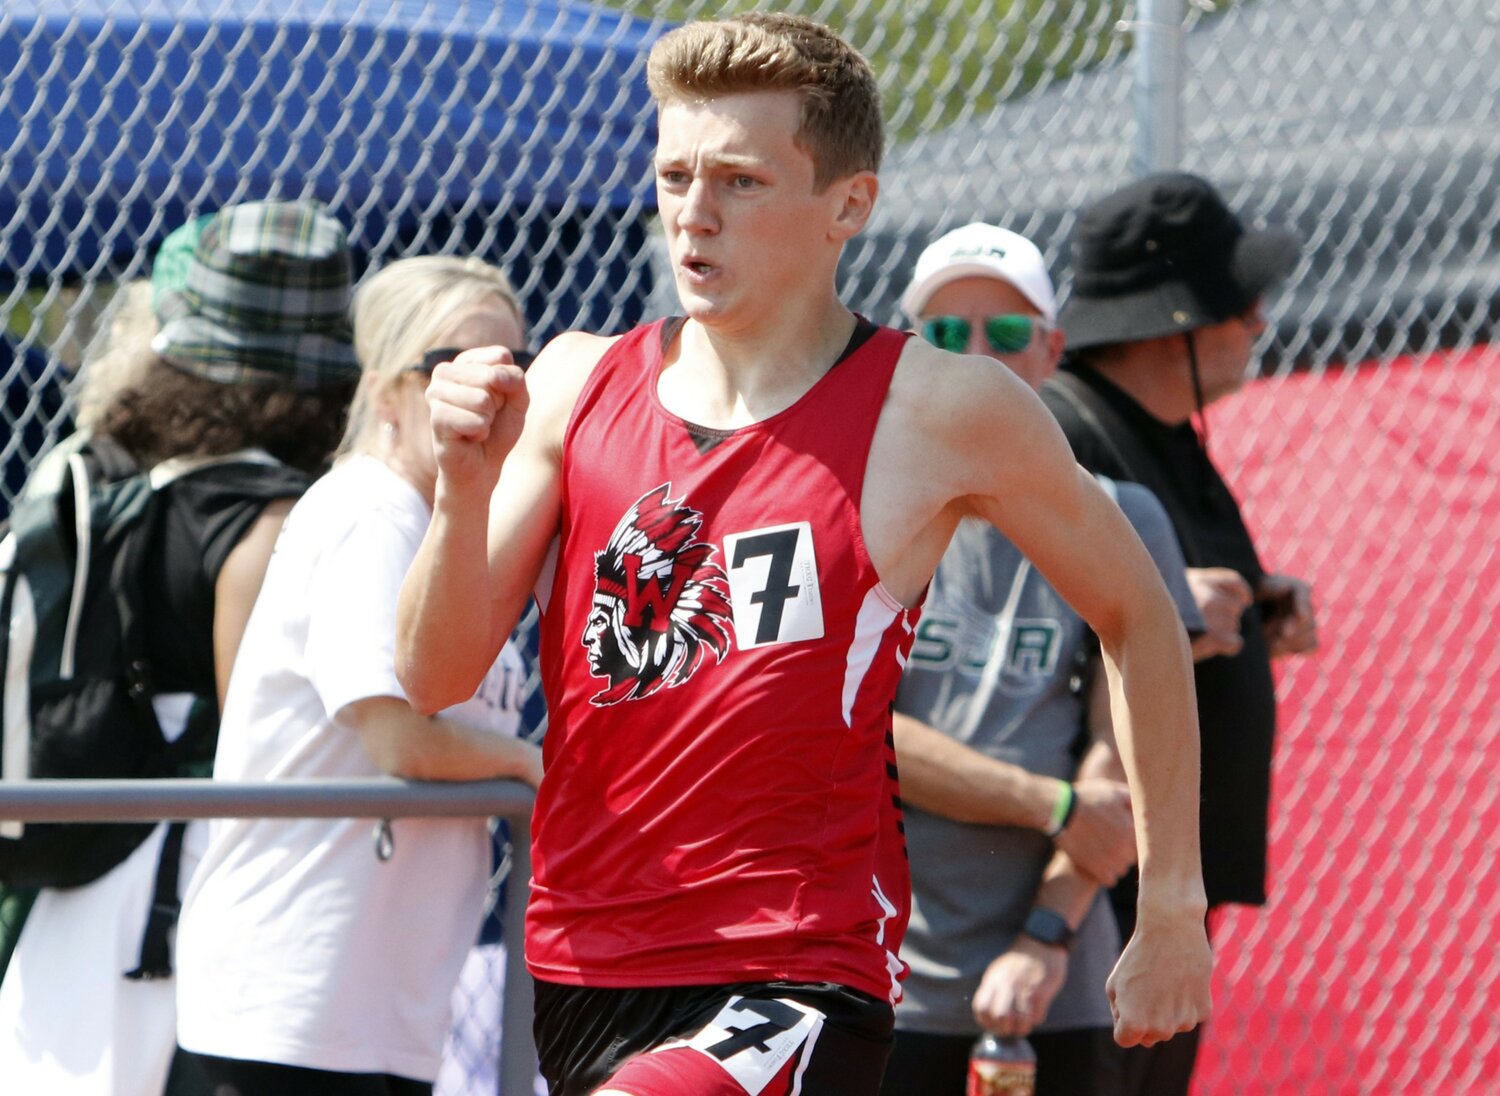 Warrenton senior Zach Bristol competes in the 400-meter dash at the Class 4, Sectional 2 competition May 20 at Mexico High School. Bristol placed third in the race to qualify for the Class 4 state meet.